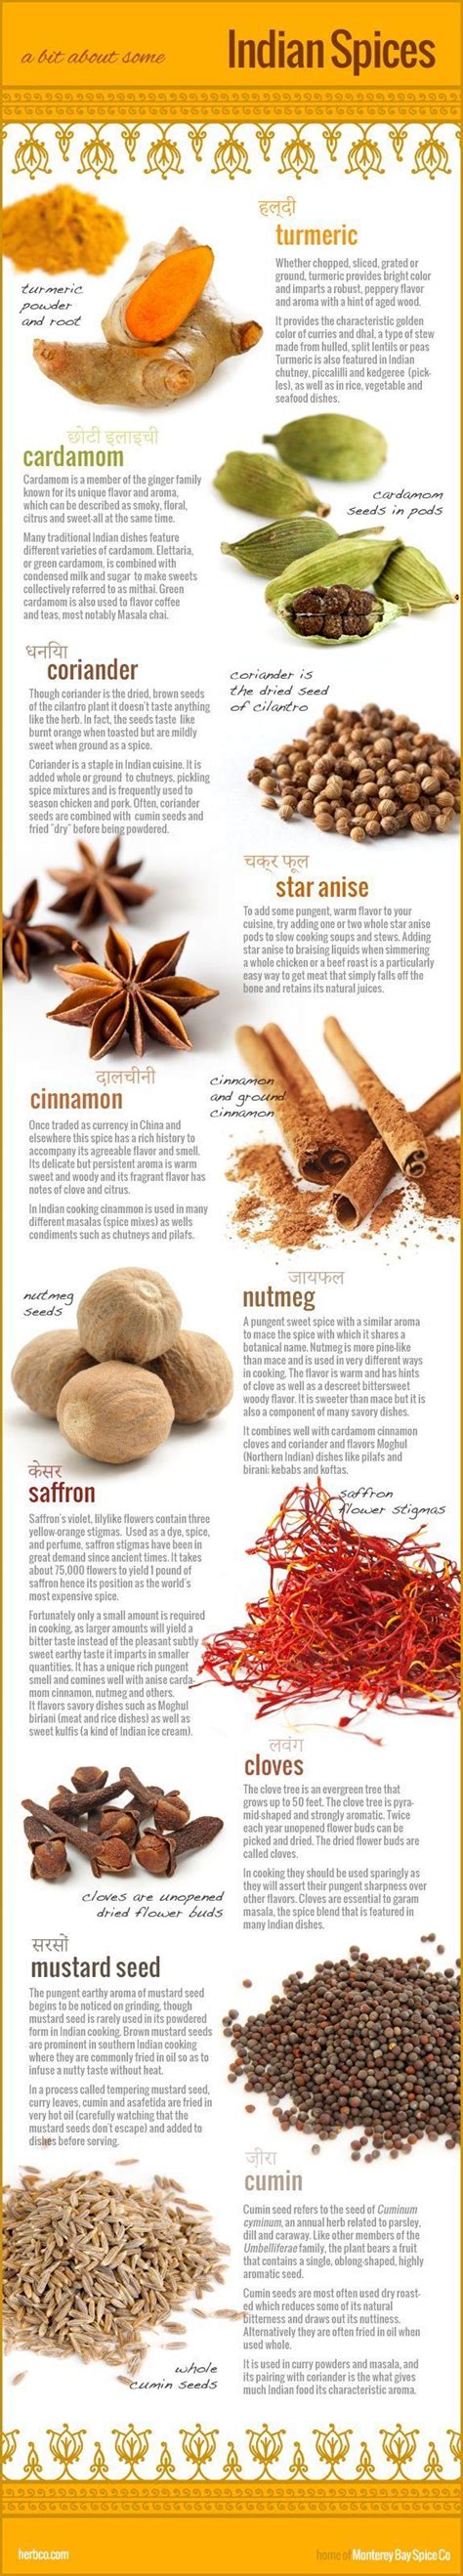 Indian Spices Infographic Indian Food Recipes Indian Spices Healthy